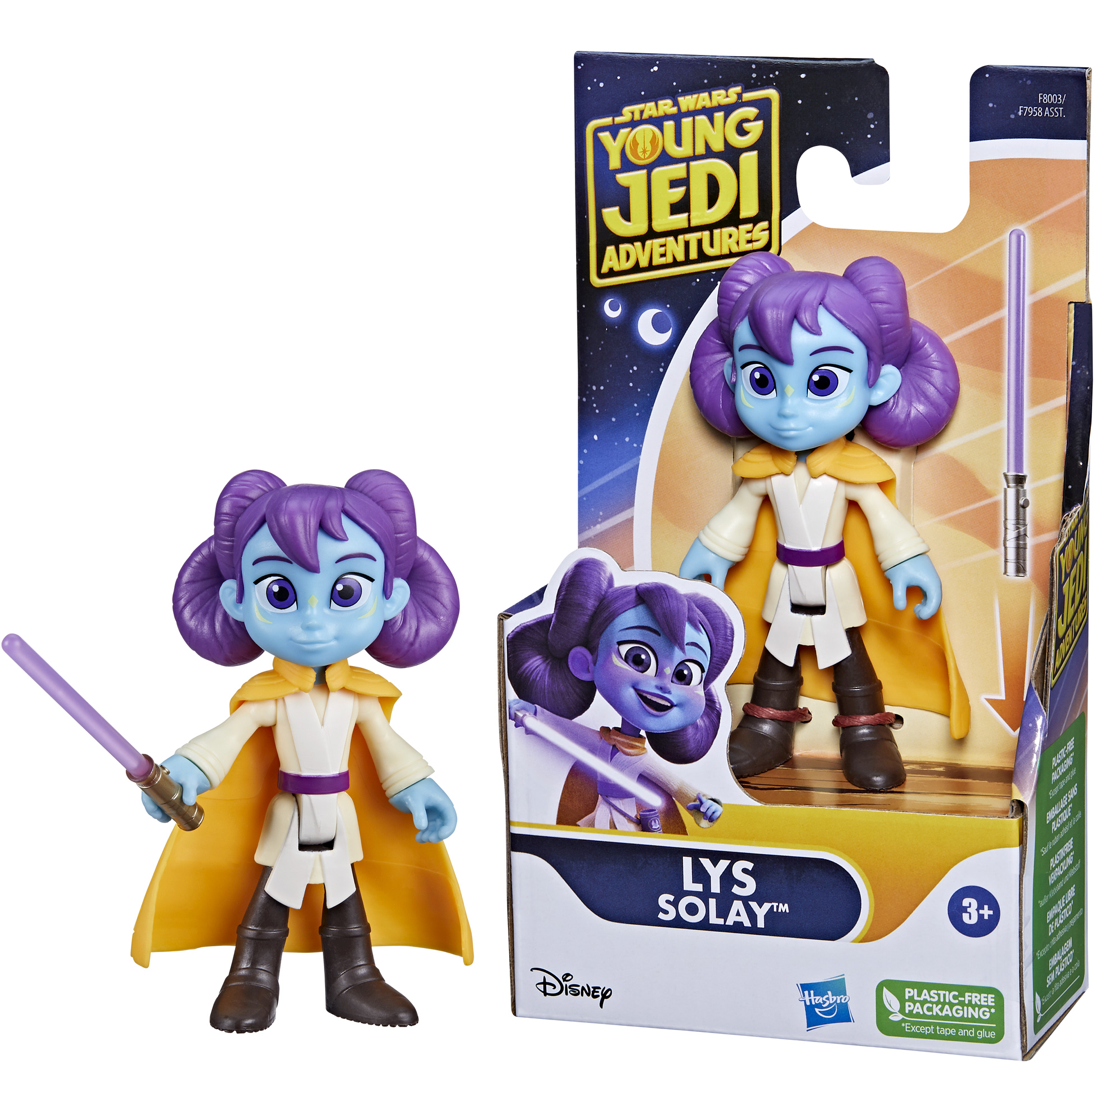 Disney Parks Star Wars Young Jedi Adventures Lys Solay Action Figure New Box